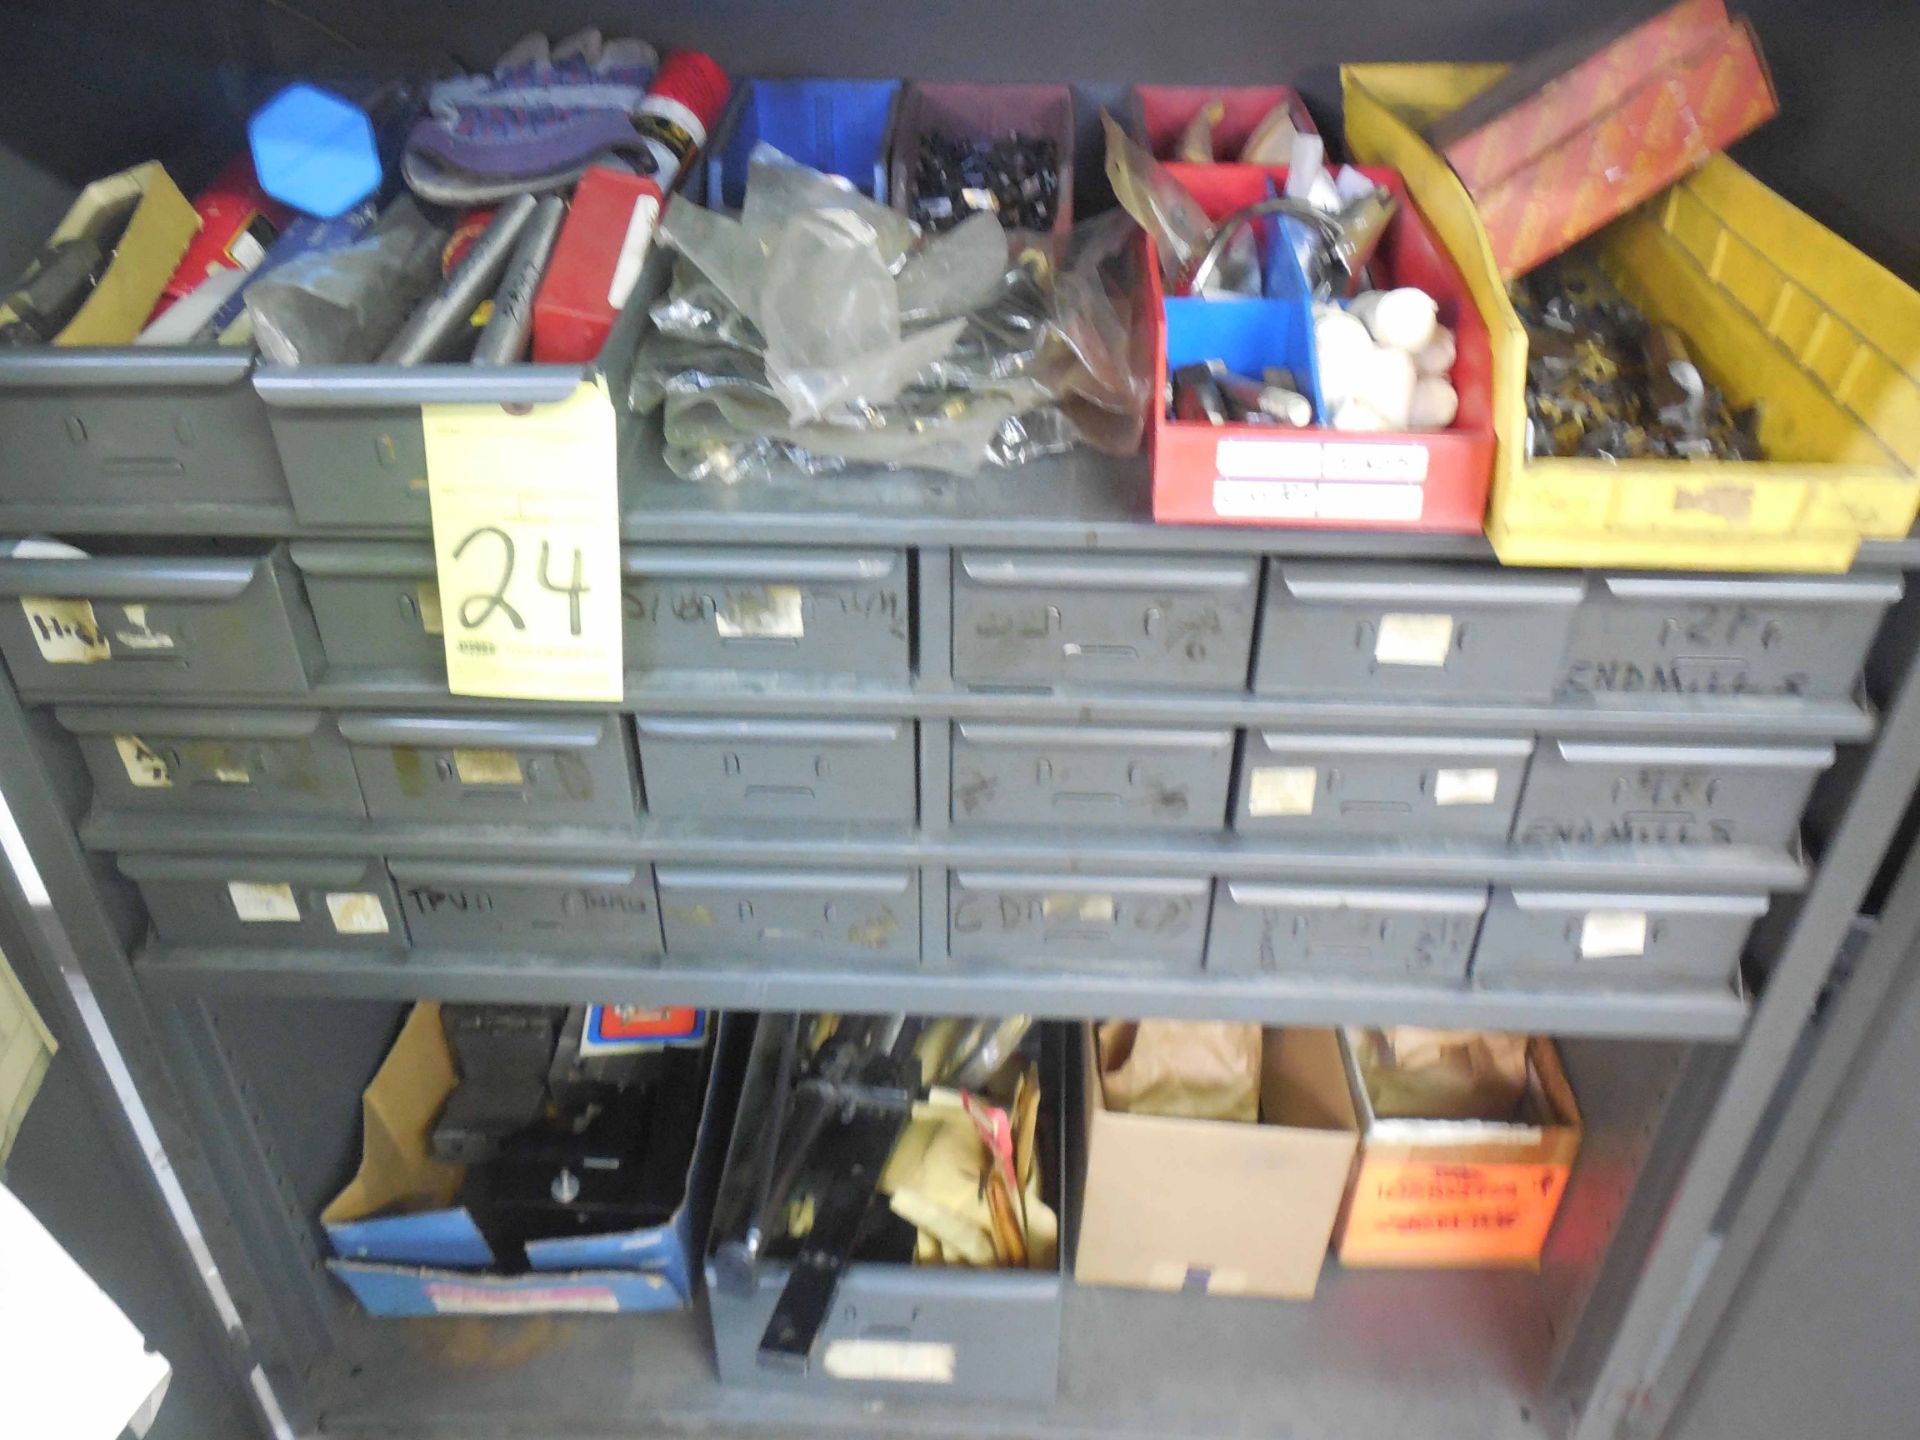 LOT CONSISTING OF: tooling, inserts, drill bits, etc.